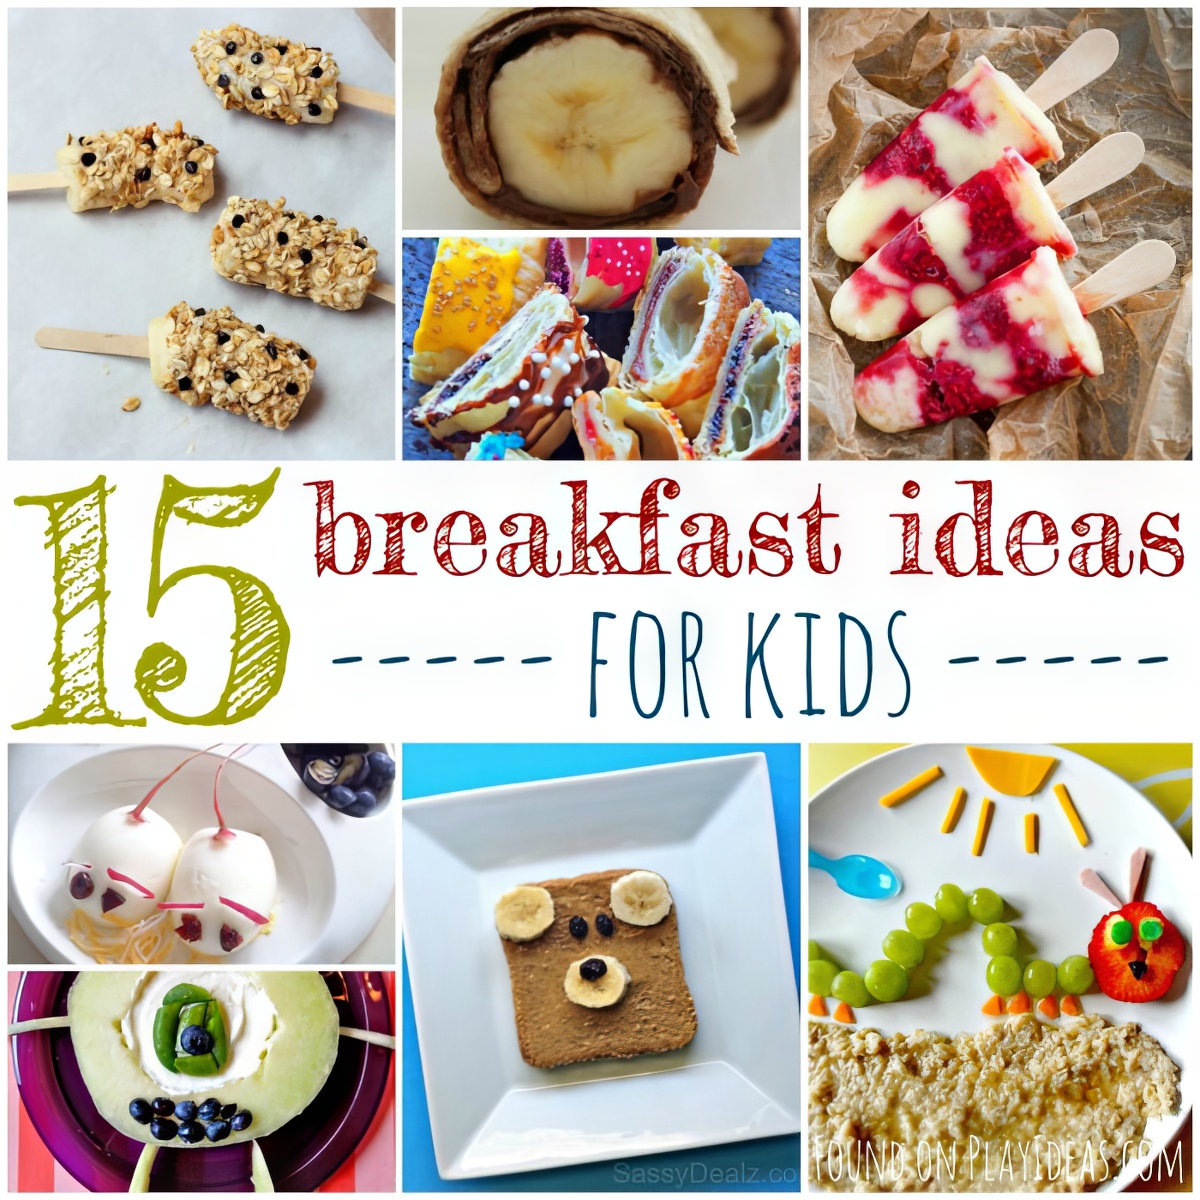 Try this super yummy, silly, and awesome breakfast ideas with your kids now!